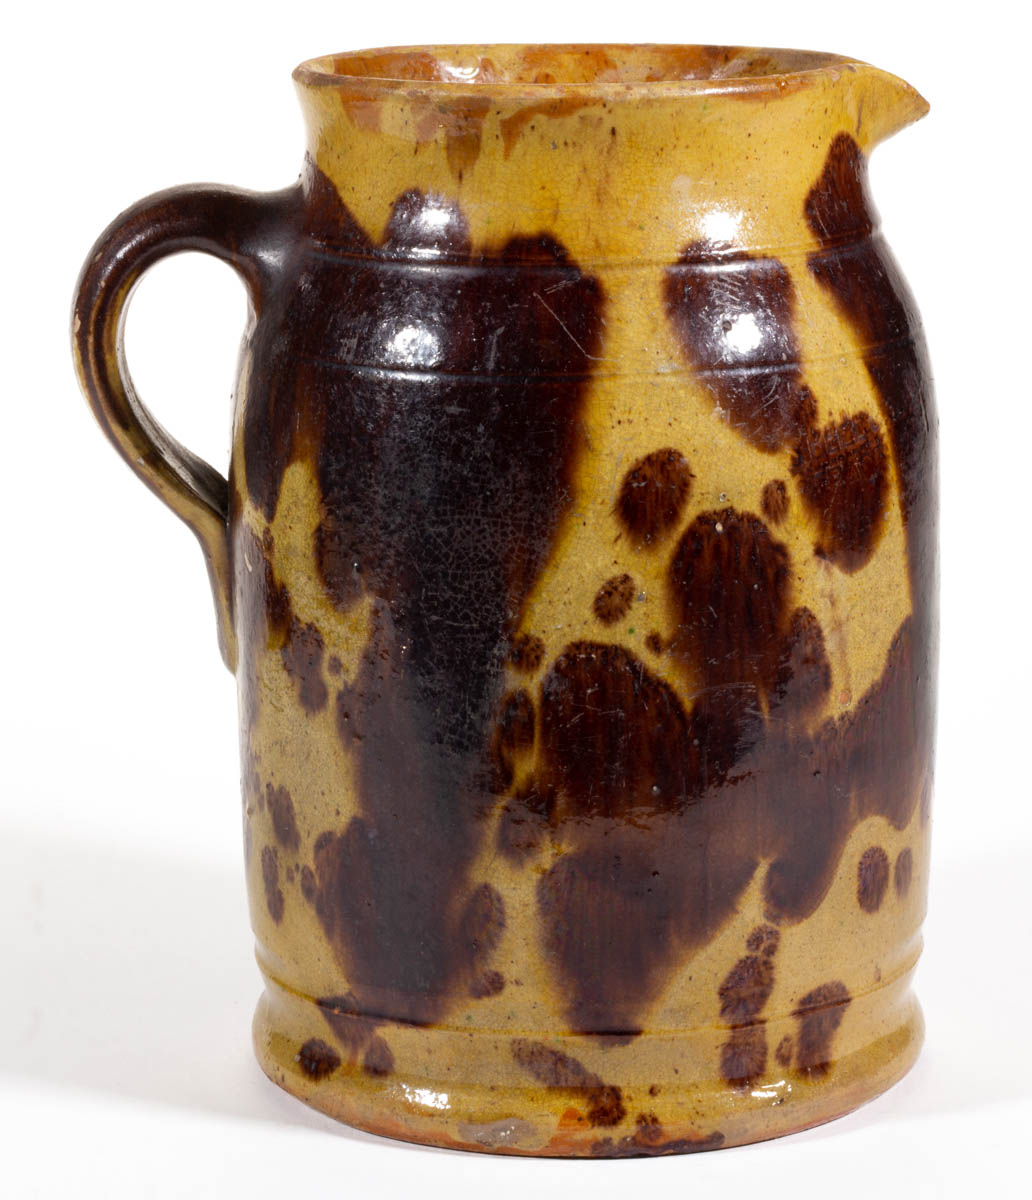 STAMPED “S. BELL & SON / STRASBURG”, SHENANDOAH VALLEY OF VIRGINIA DECORATED EARTHENWARE / REDWARE PITCHER